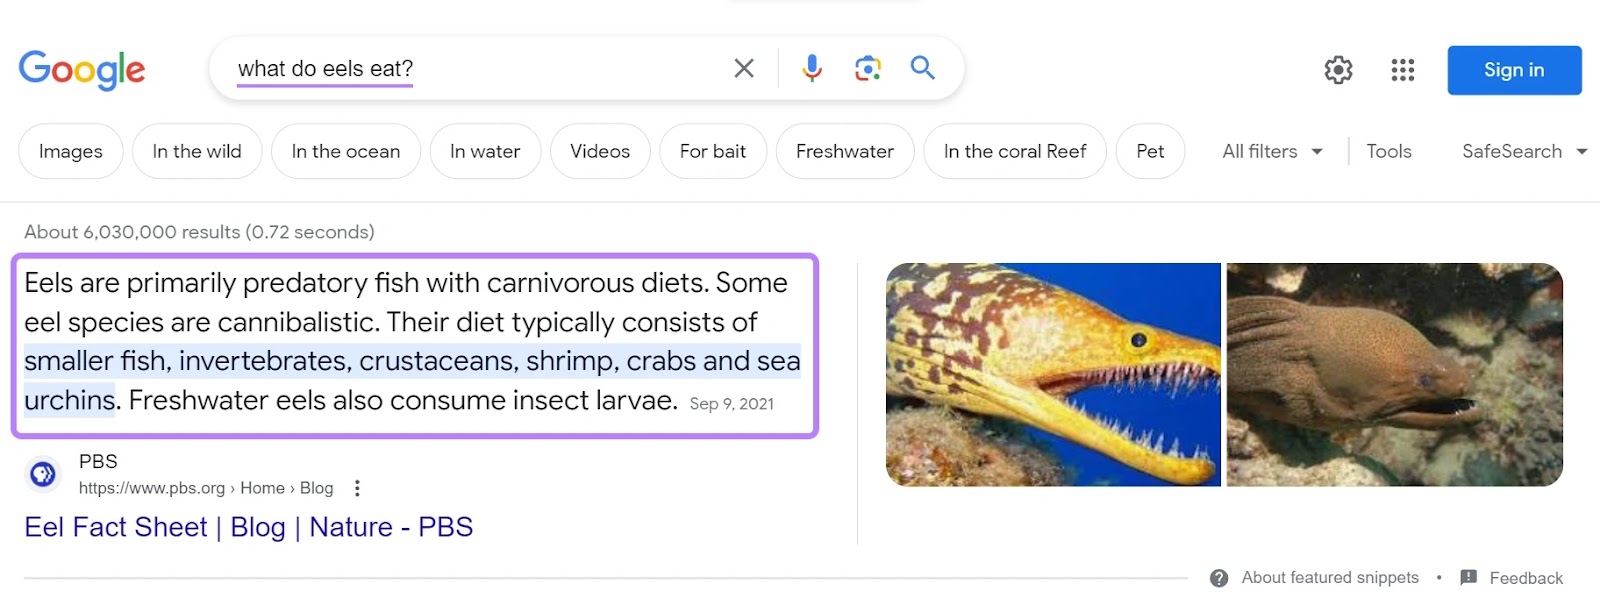 A featured snippet paragraph highlighted for "what do eels eat?" query